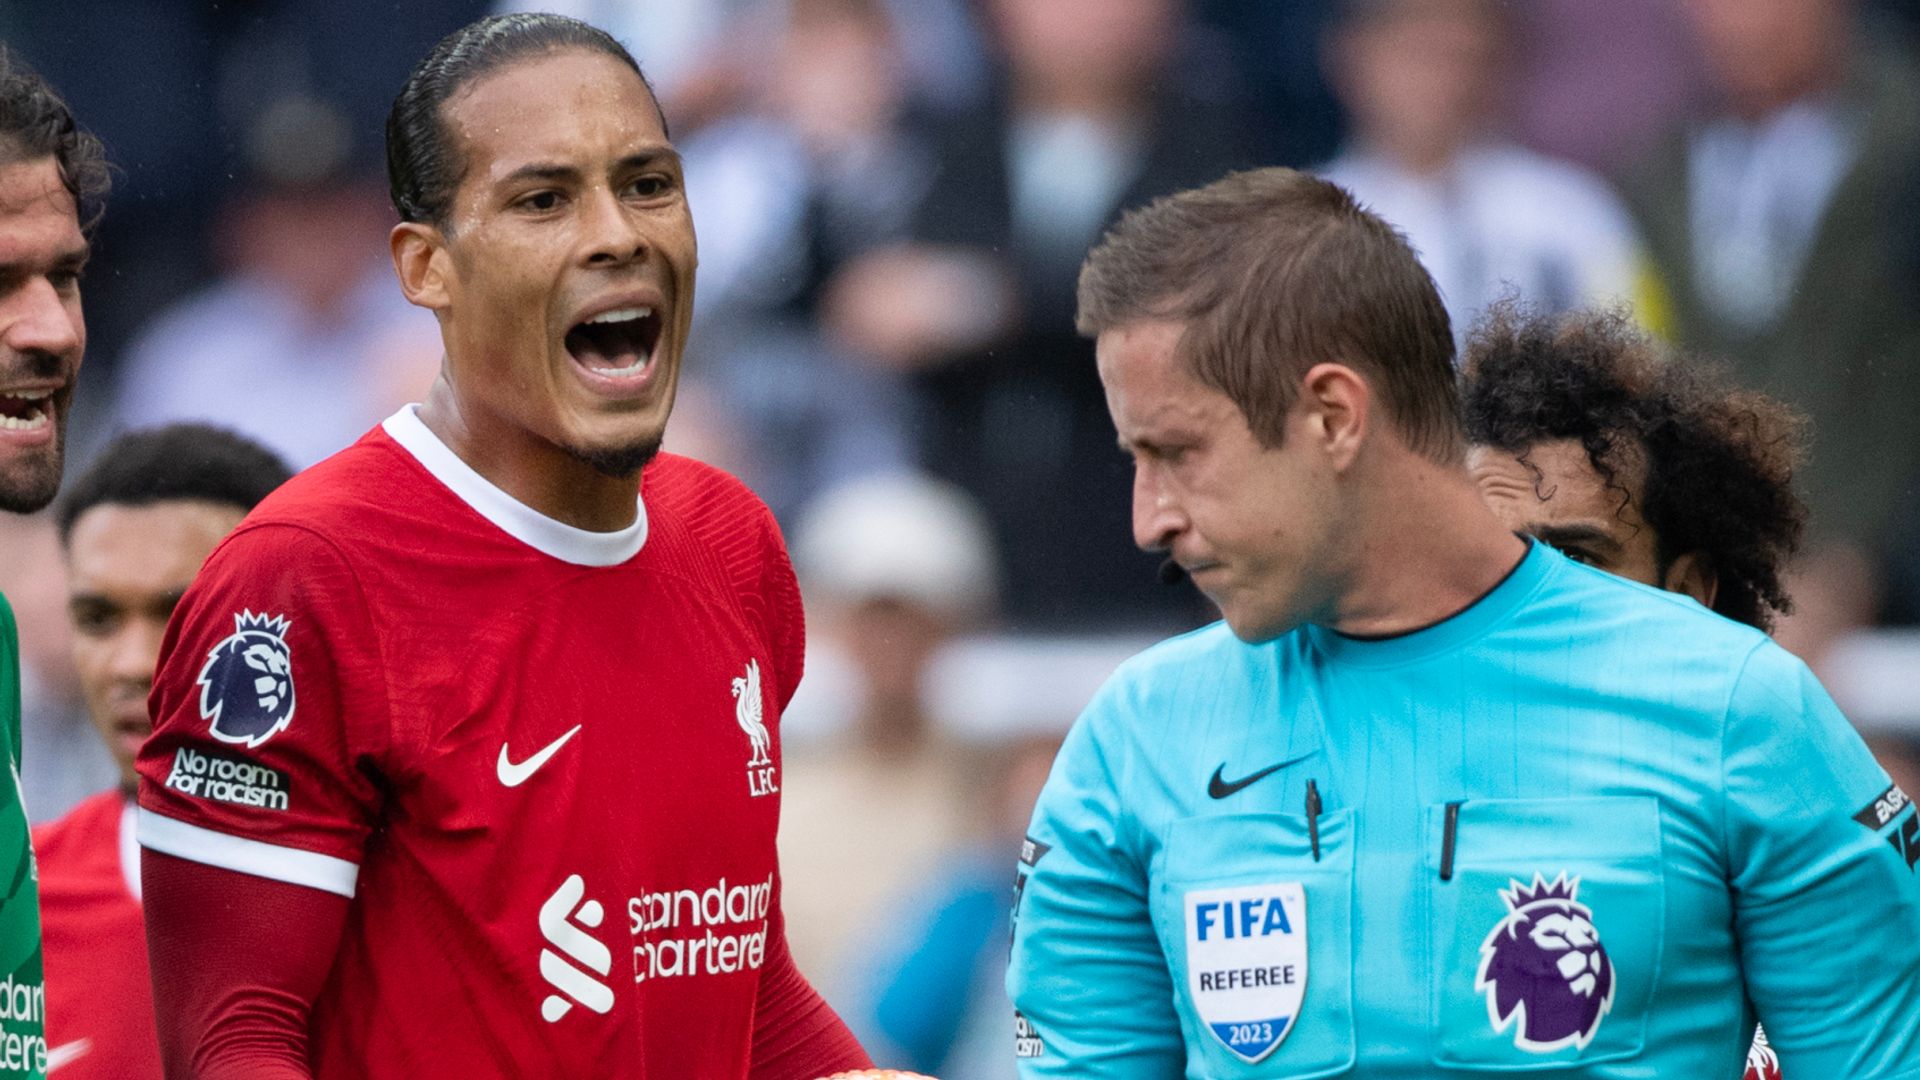 Van Dijk handed extra one-match ban for reaction to Newcastle red card